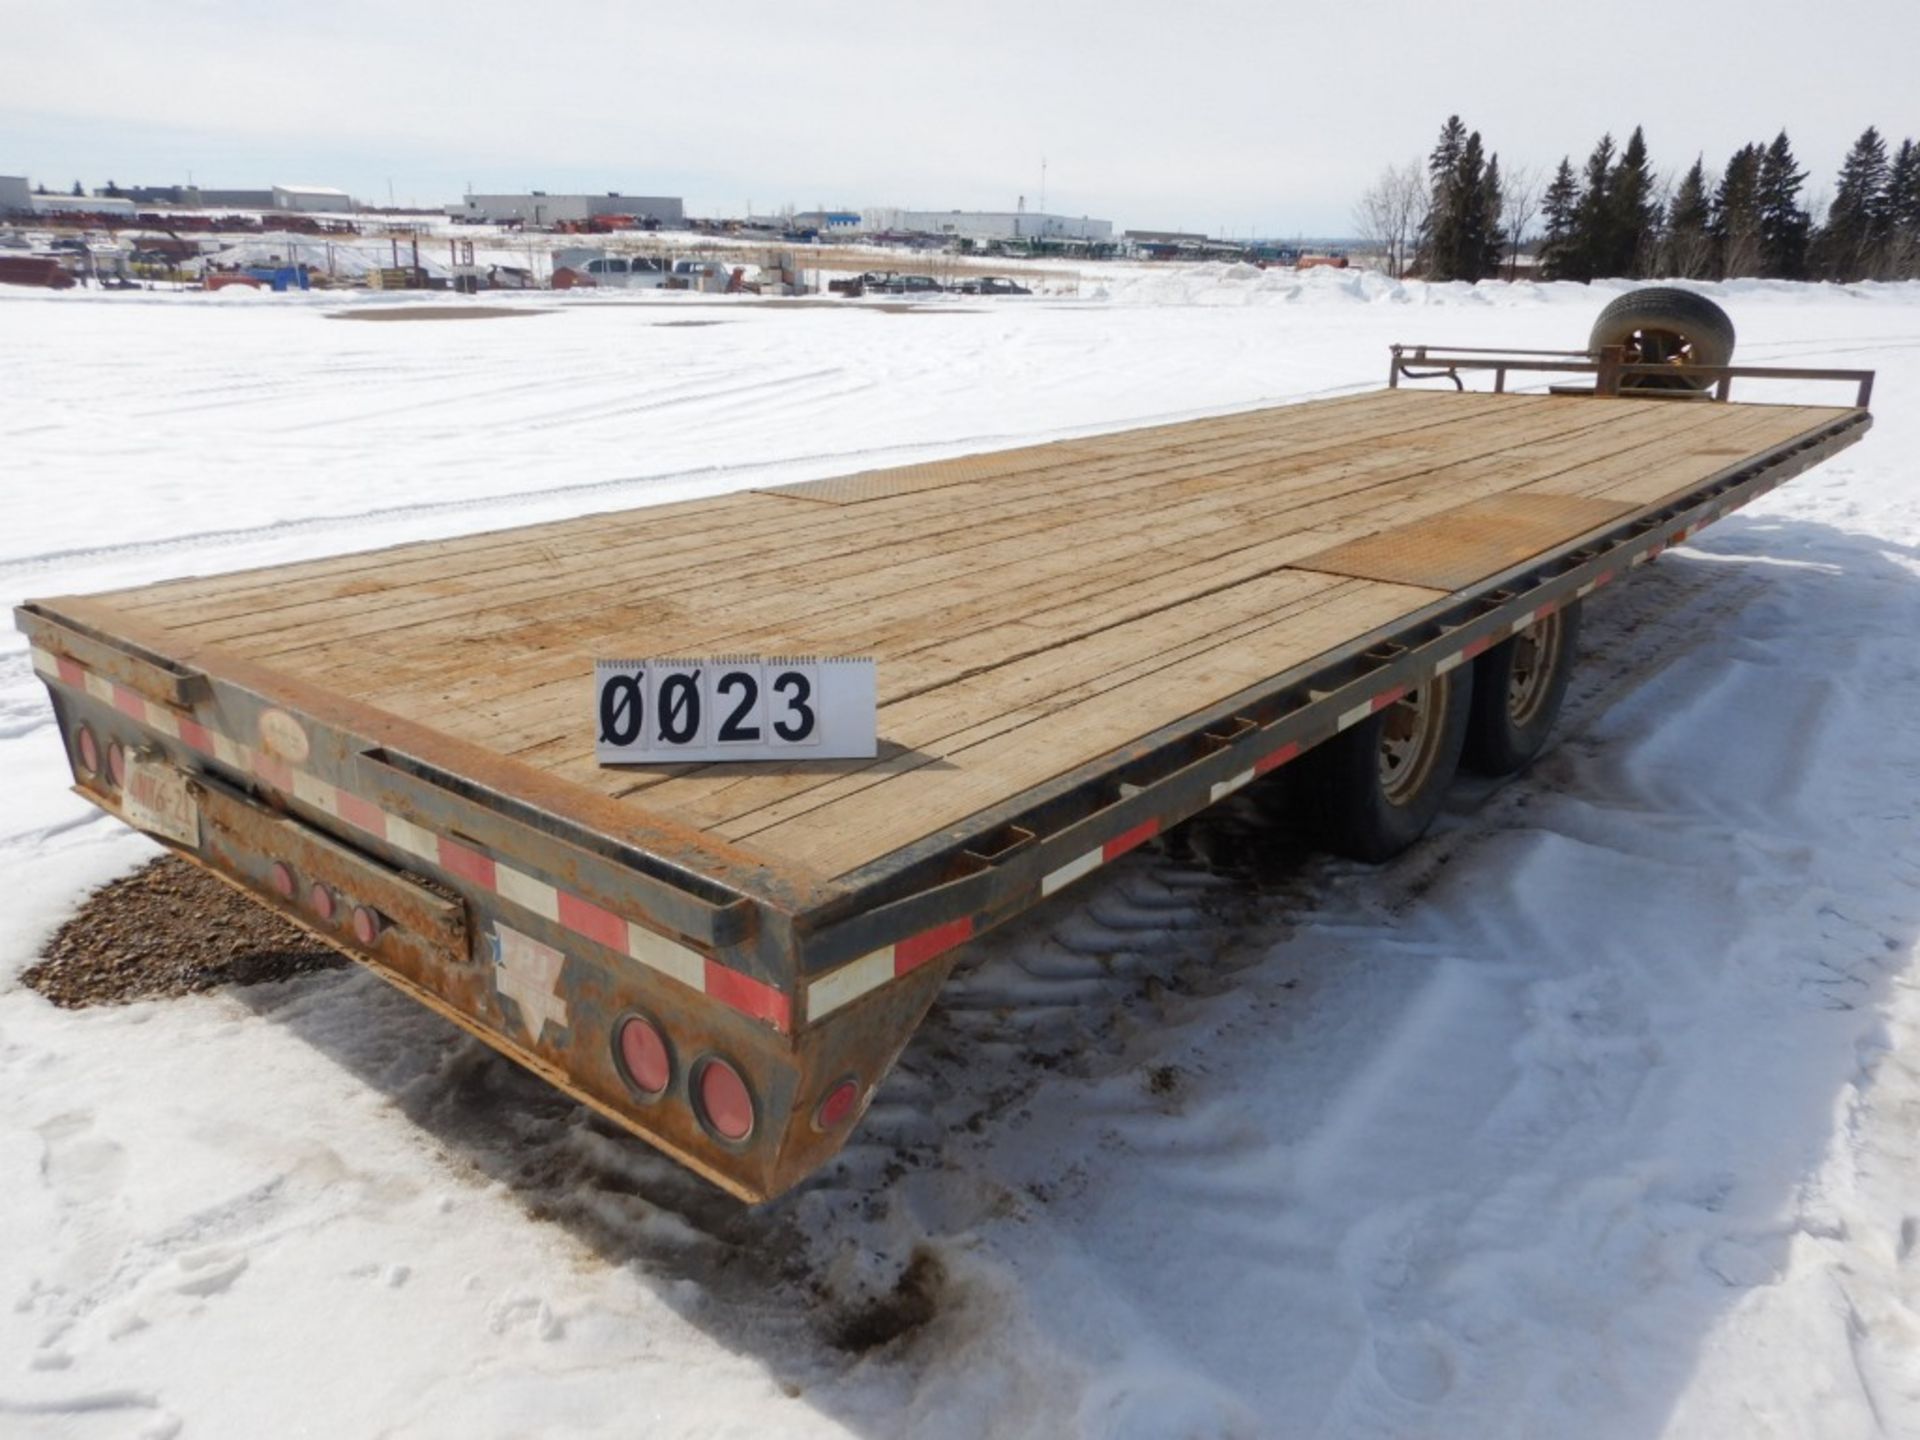 2013 PJ T/A 14000LB DECK-OVER EQUIPMENT TRAILERS W/RAMPS, BALL HITCH, 8'6" X 24FT - Image 2 of 5